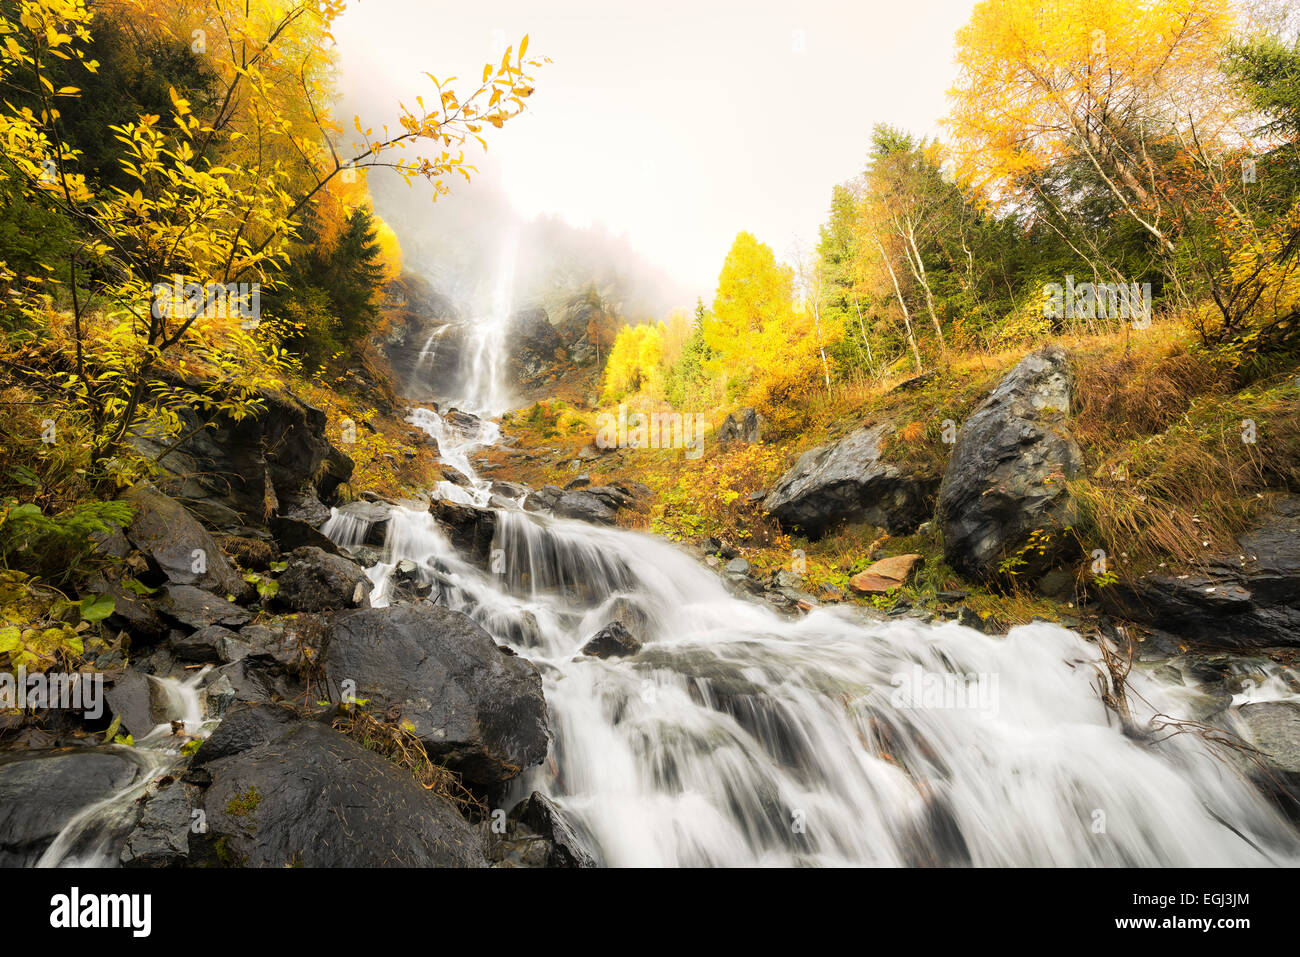 Waterfall, Alps, autumn, colouring, dynamically, water, fog, Stock Photo